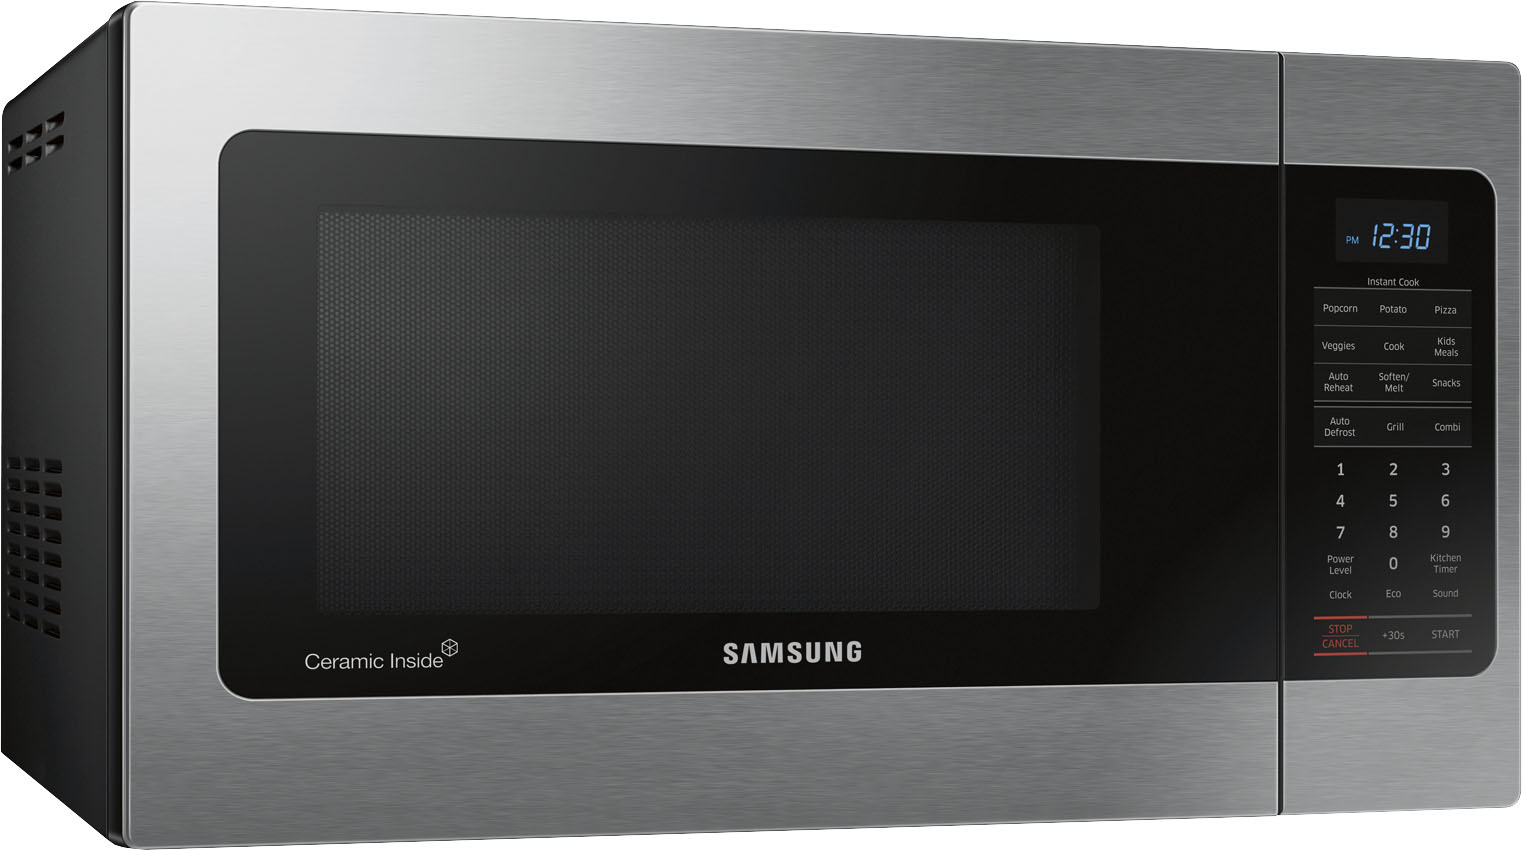 GE 1.1cu.ft. Countertop Microwave Oven - Stainless Steel